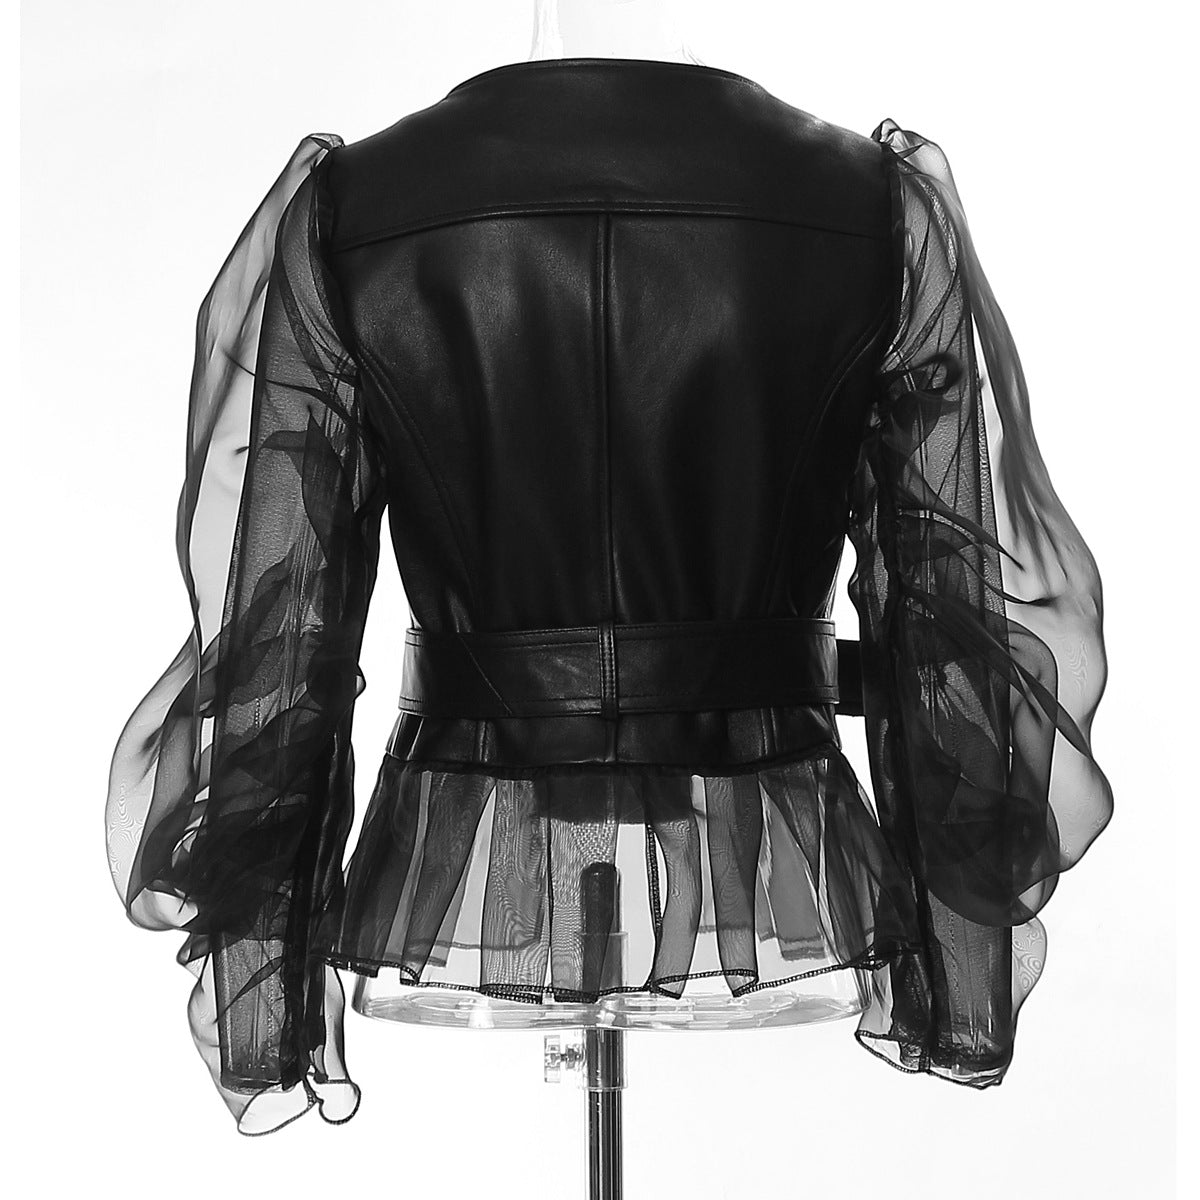 PU leather and mesh top + skirt